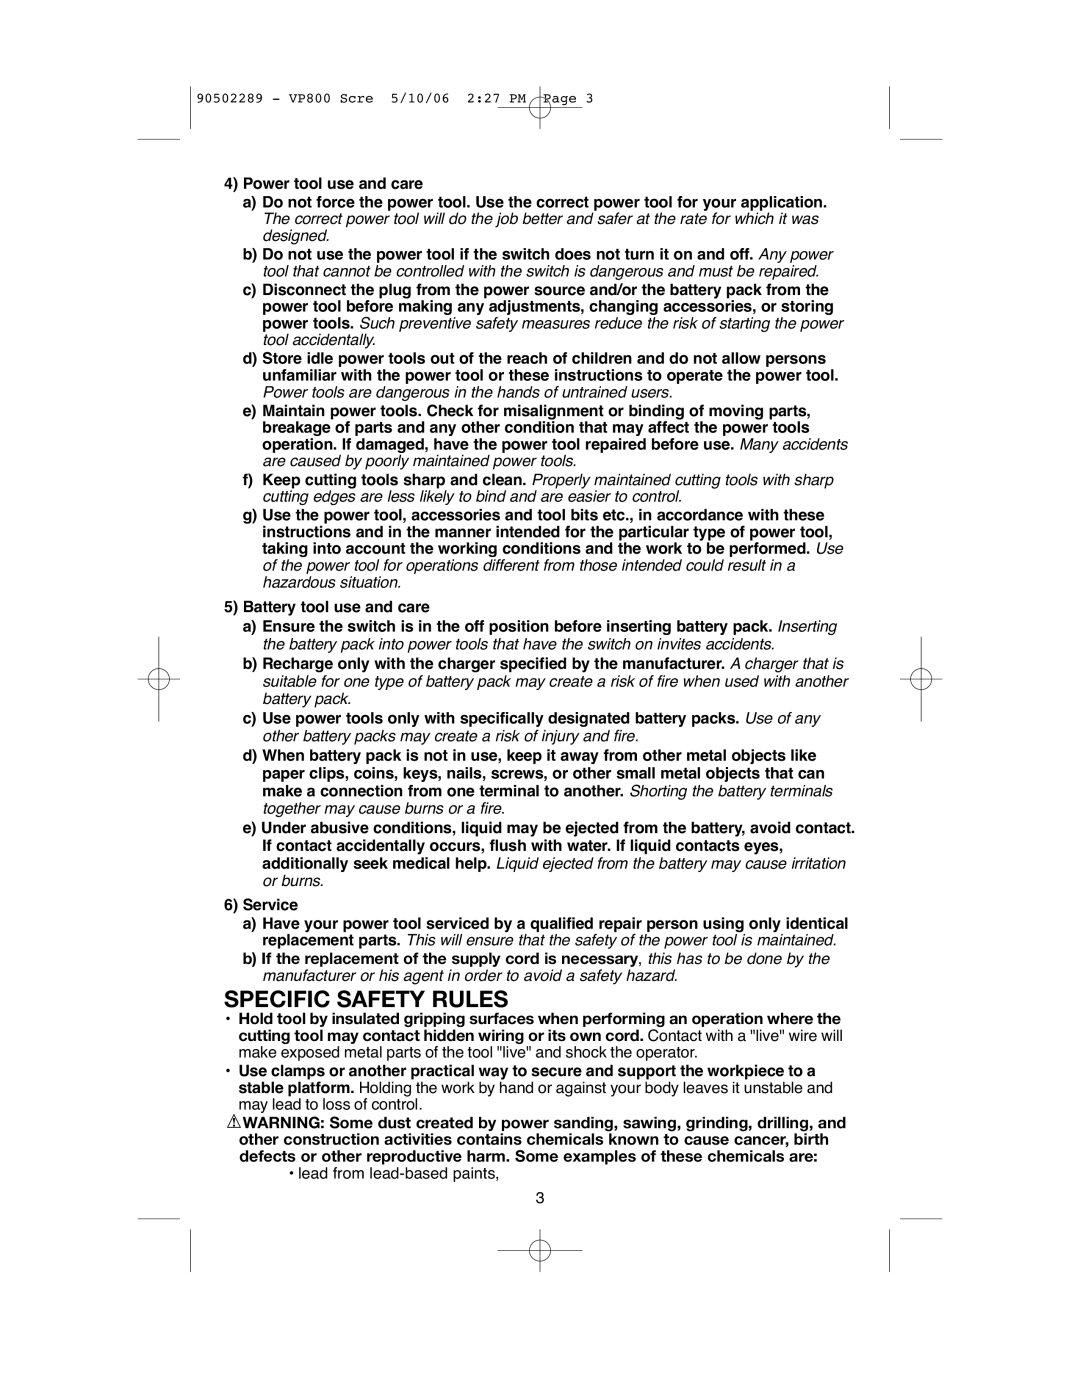 Black & Decker VP800 instruction manual Specific Safety Rules 